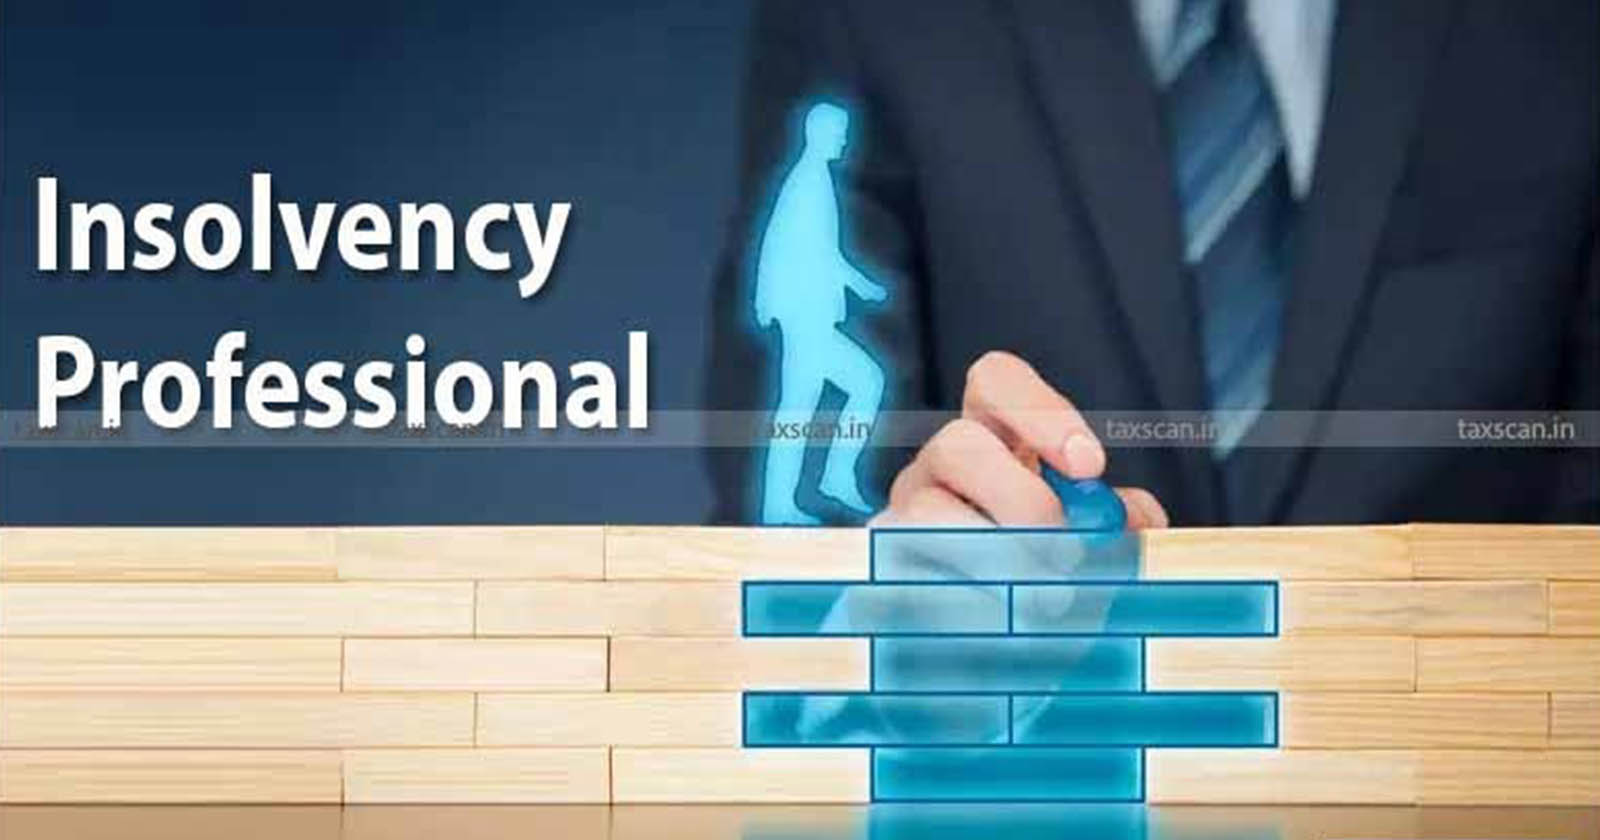 Insolvency Professional - Appointing Insolvency Professional - Scrutiny of Past Actions - SEBI regulations - Securities Exchange Board Of India - TAXSCAN